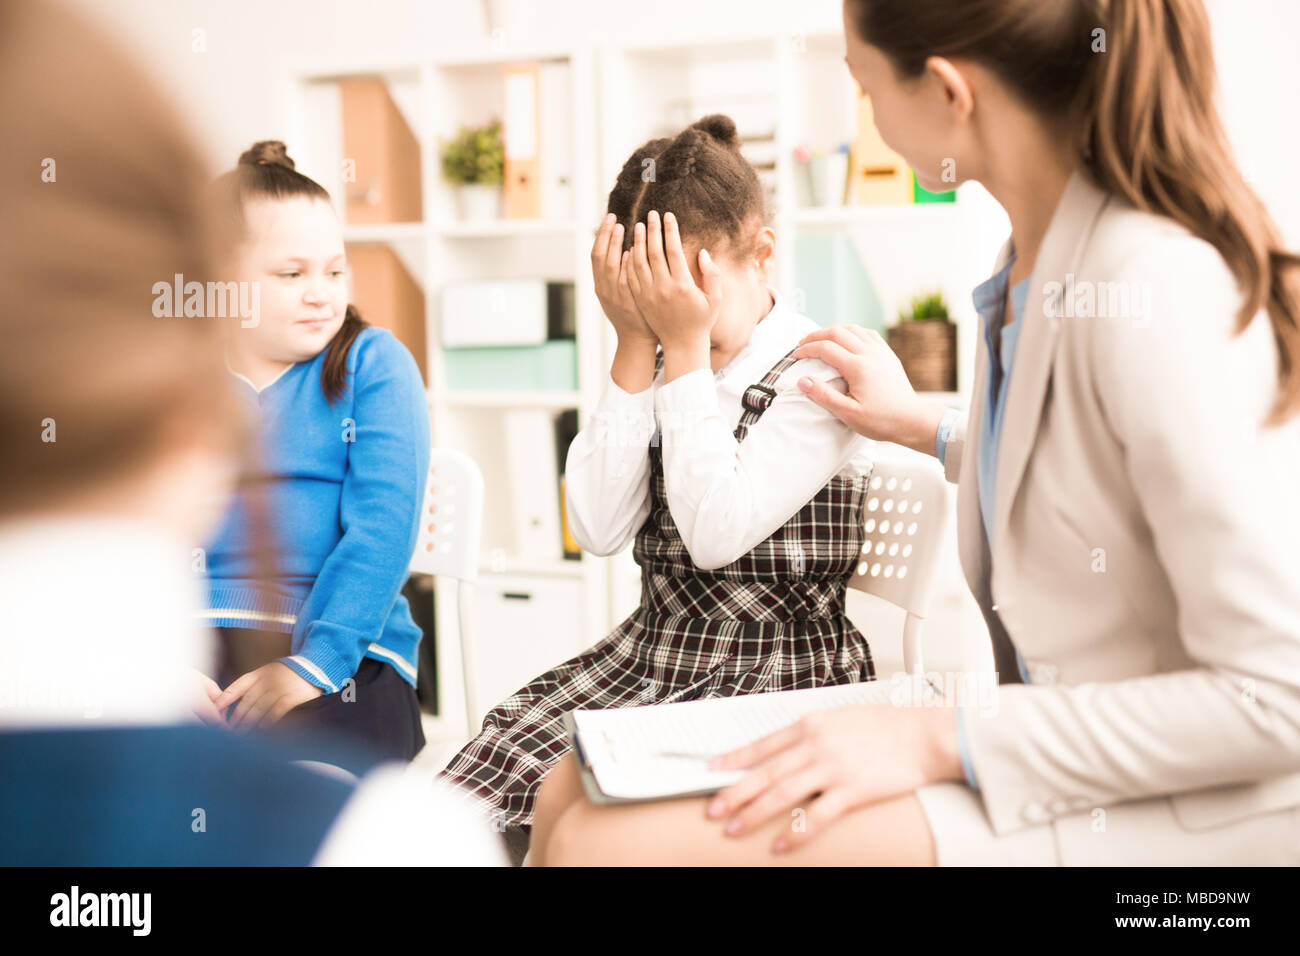 Crying girl sitting on chair nearby with school psychologist or teacher trying to comfort her Stock Photo